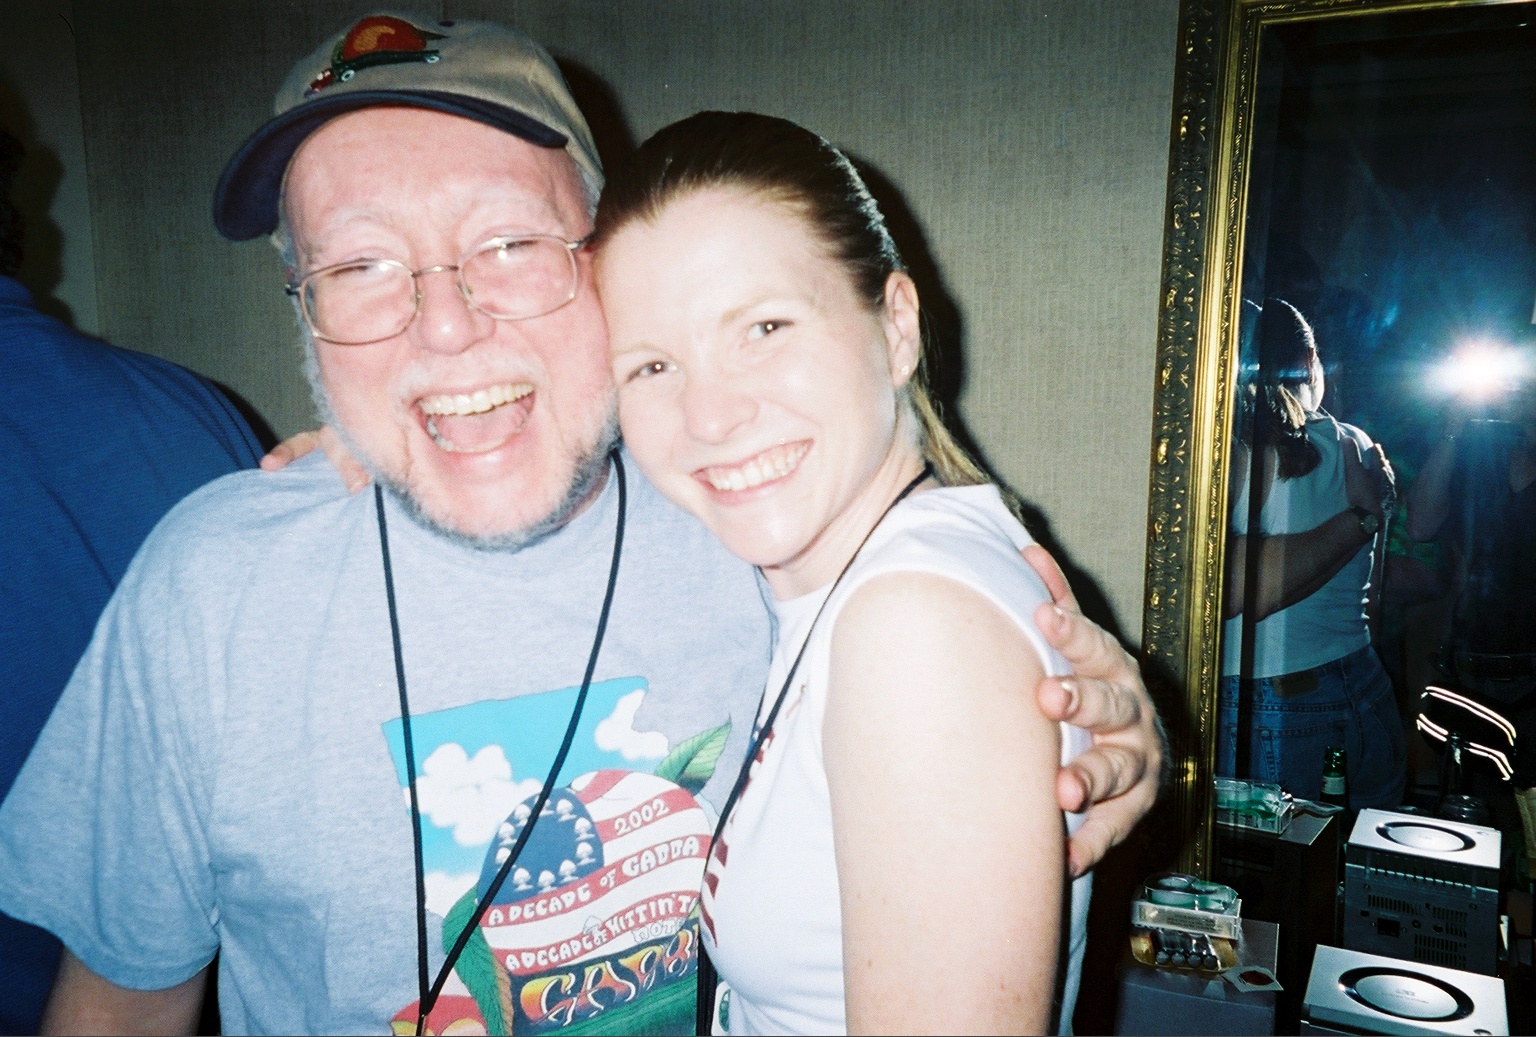 Buppalo & Jeanne sharing a *smile* and a hug at the Beacon 2003.